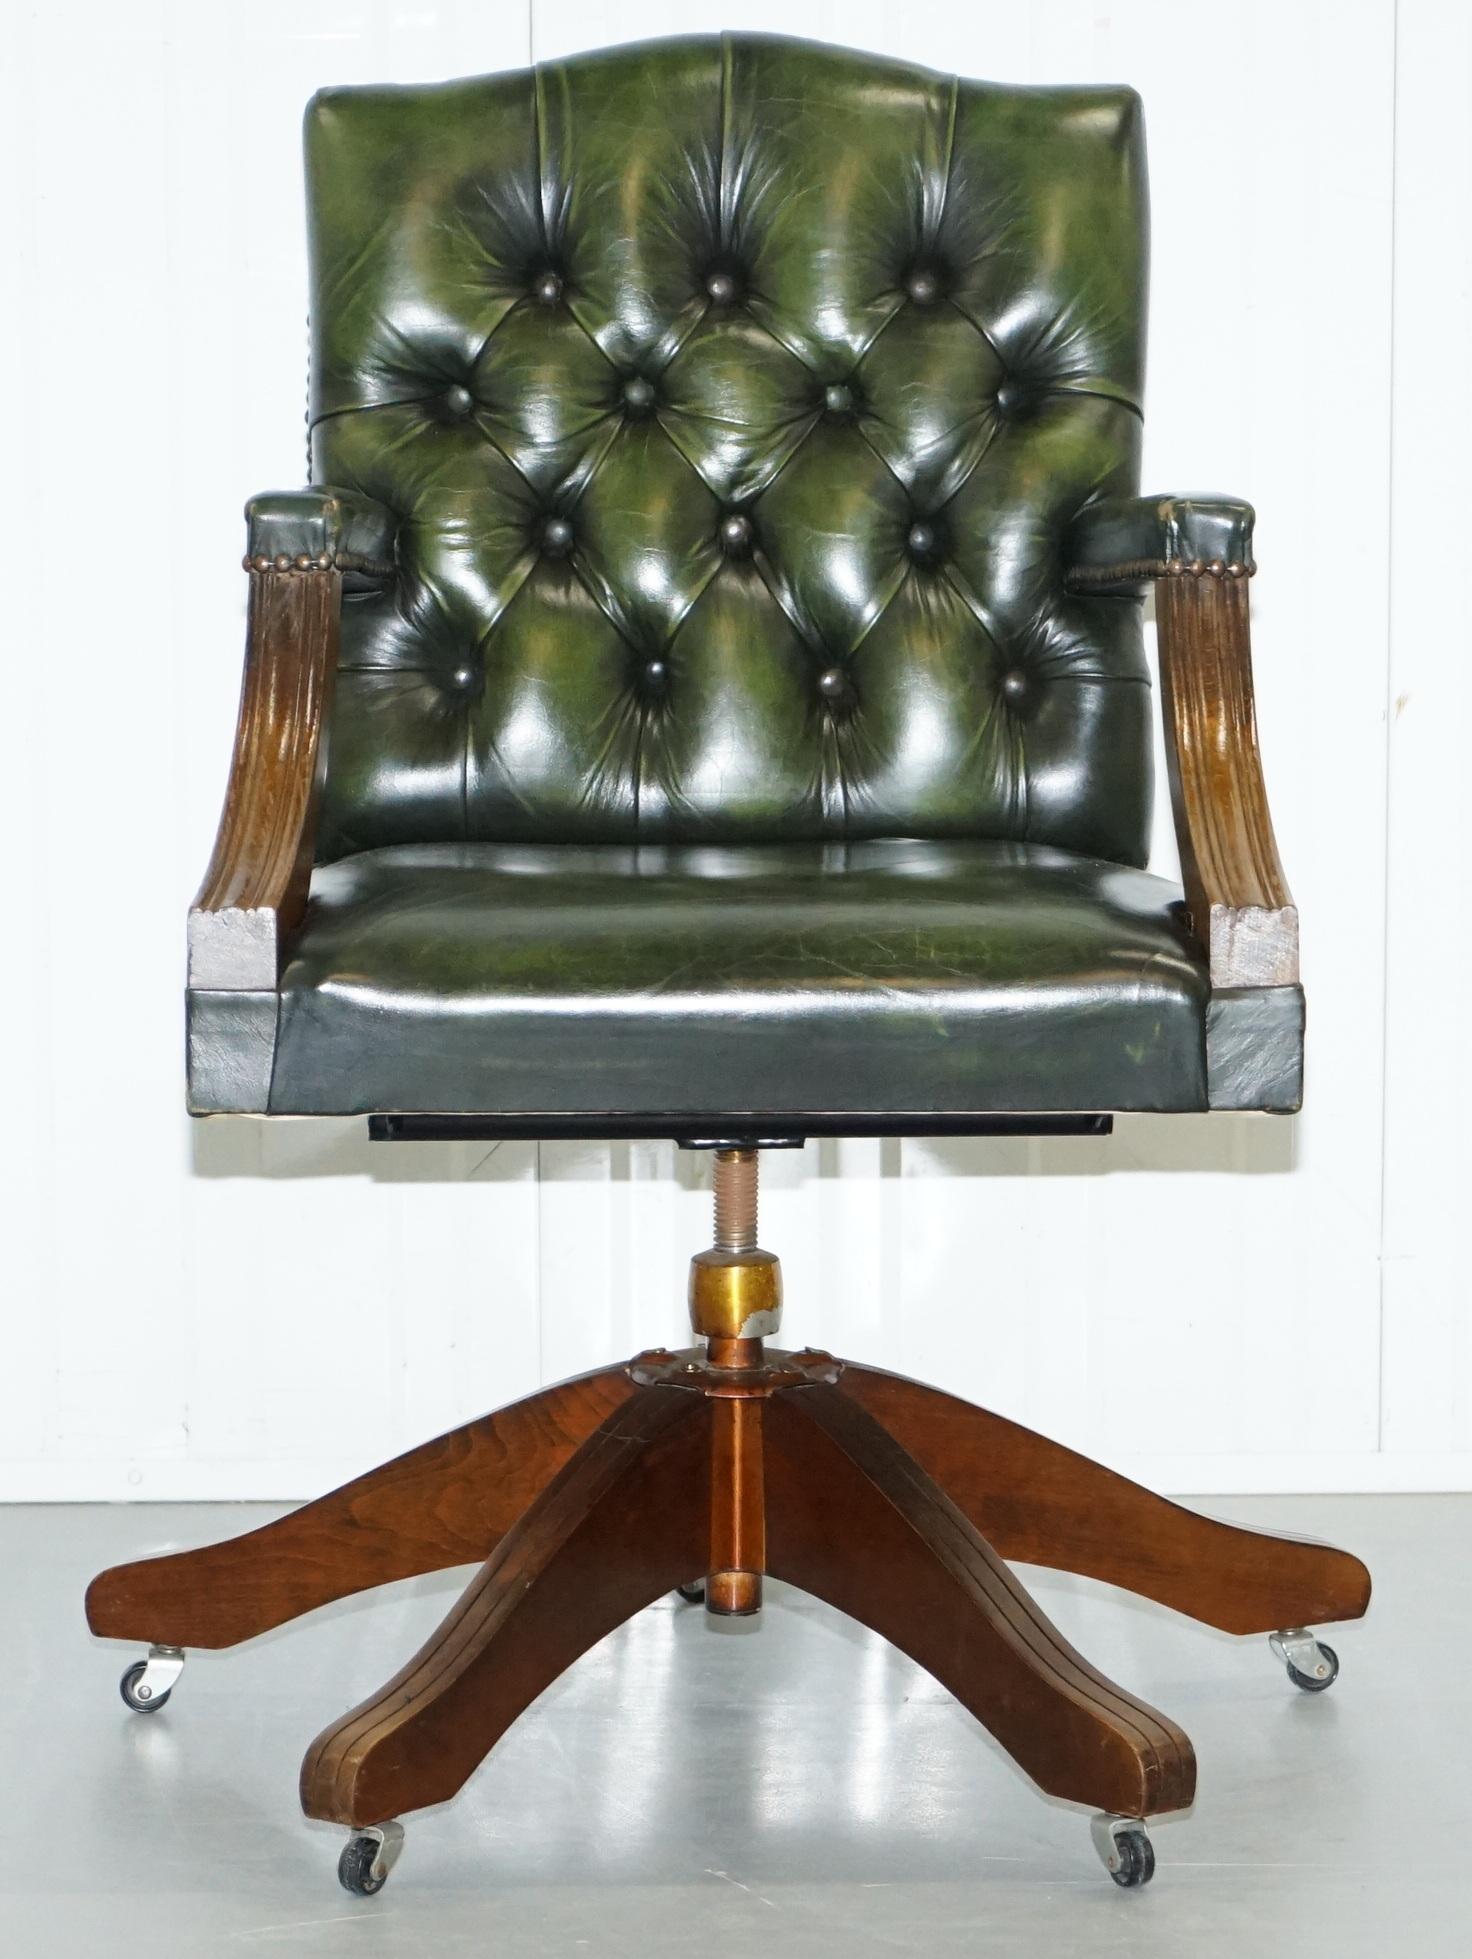 We are delighted to offer for sale this lovely vintage Bevan Funnel directors green leather captains office chair

This is a vintage chair around 20 years old, they still make the same model today, the modern chair retails for £3900

All Bevan